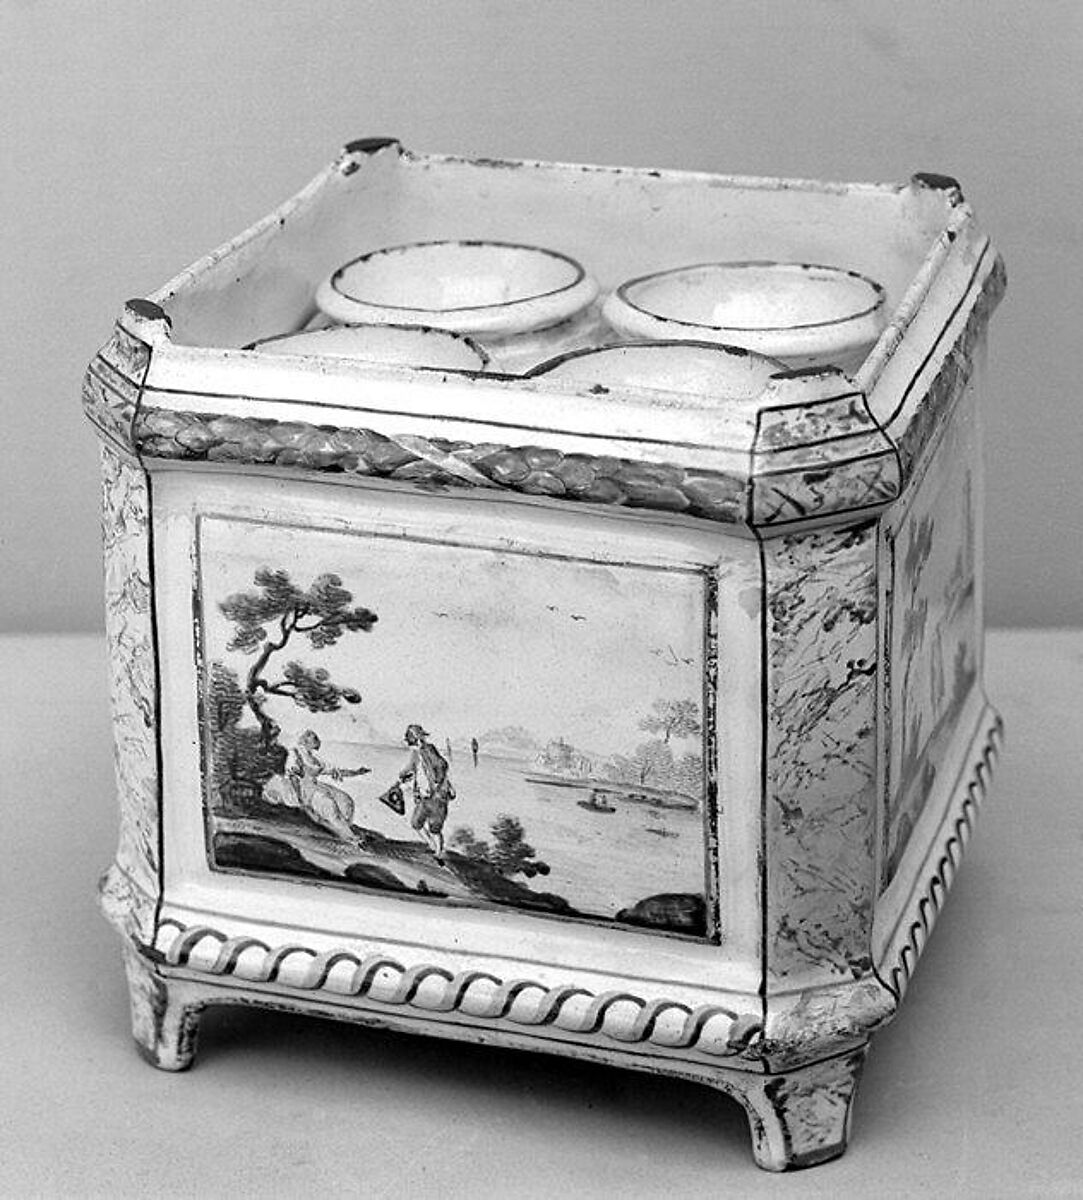 Jardinière, Fidelle Duvivier (French, 1740–after 1796), Faience (tin-glazed earthenware), French, Sceaux 